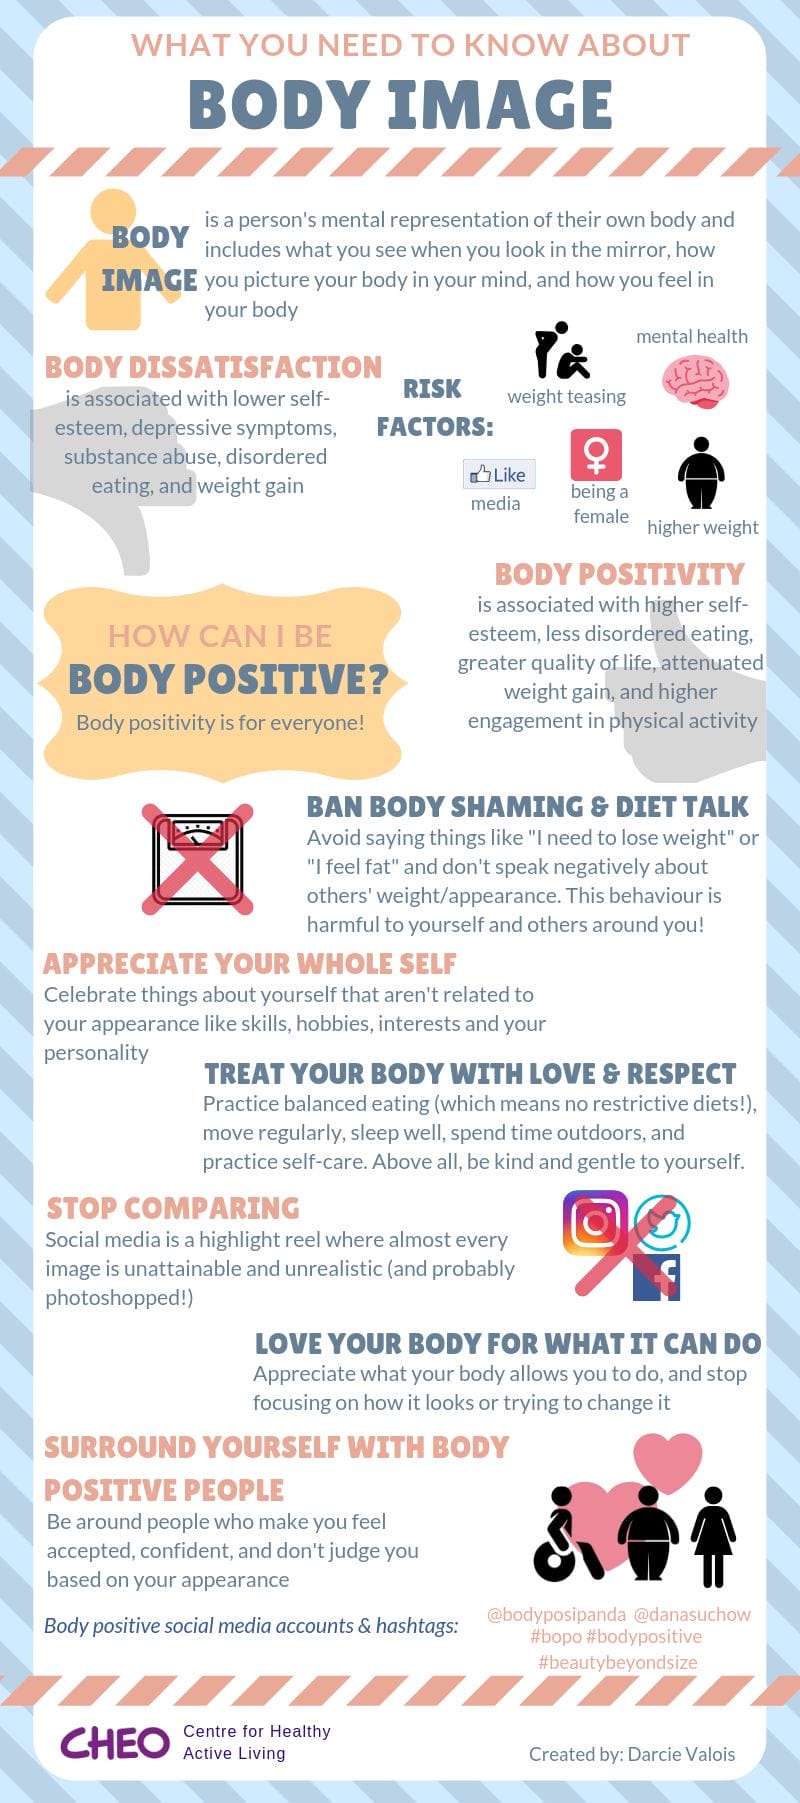 Infographic titled "what you need to know about body image" covering concepts of body image, effects on self-esteem, risk factors, and positive actions.